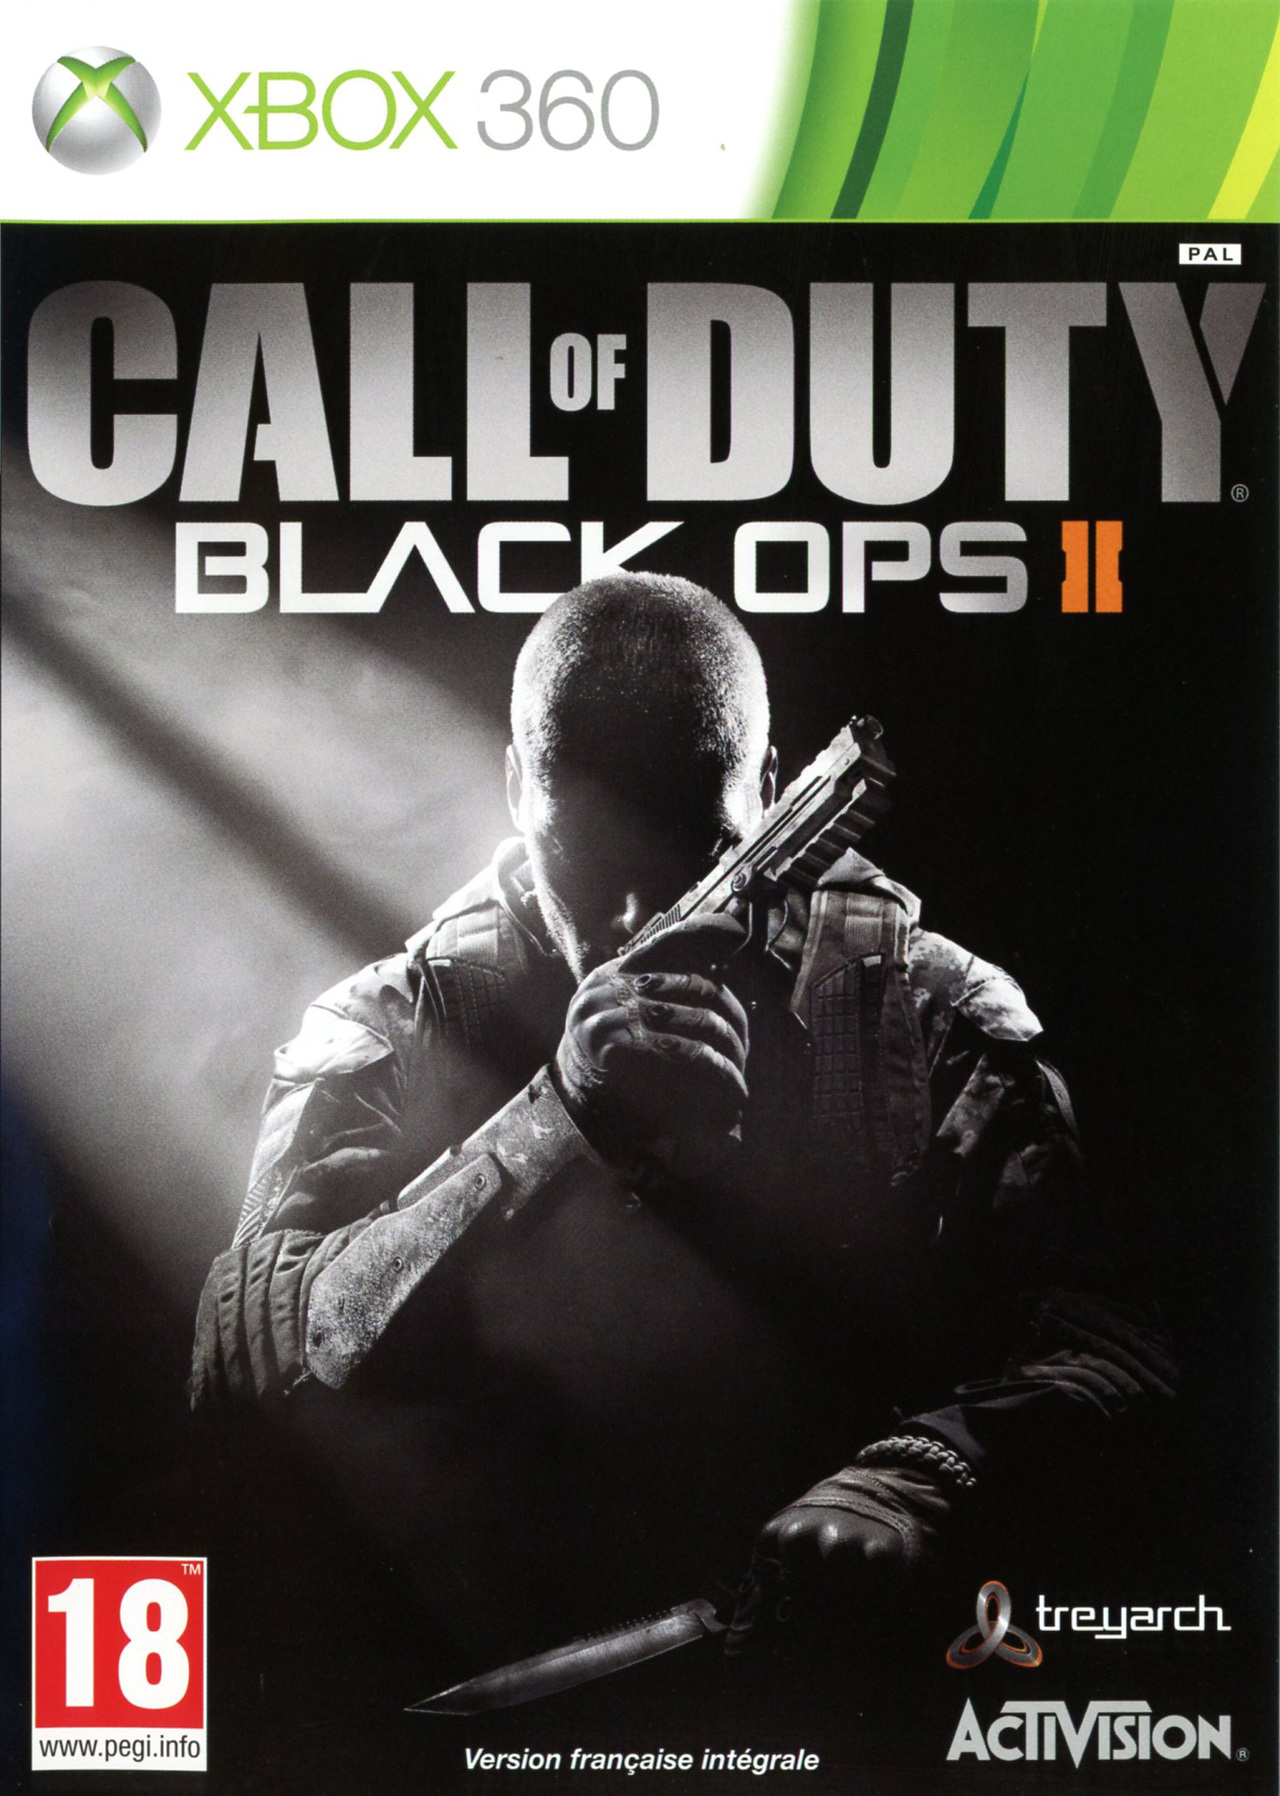 http://image.jeuxvideo.com/images/jaquettes/00043688/jaquette-call-of-duty-black-ops-ii-xbox-360-cover-avant-g-1352711567.jpg